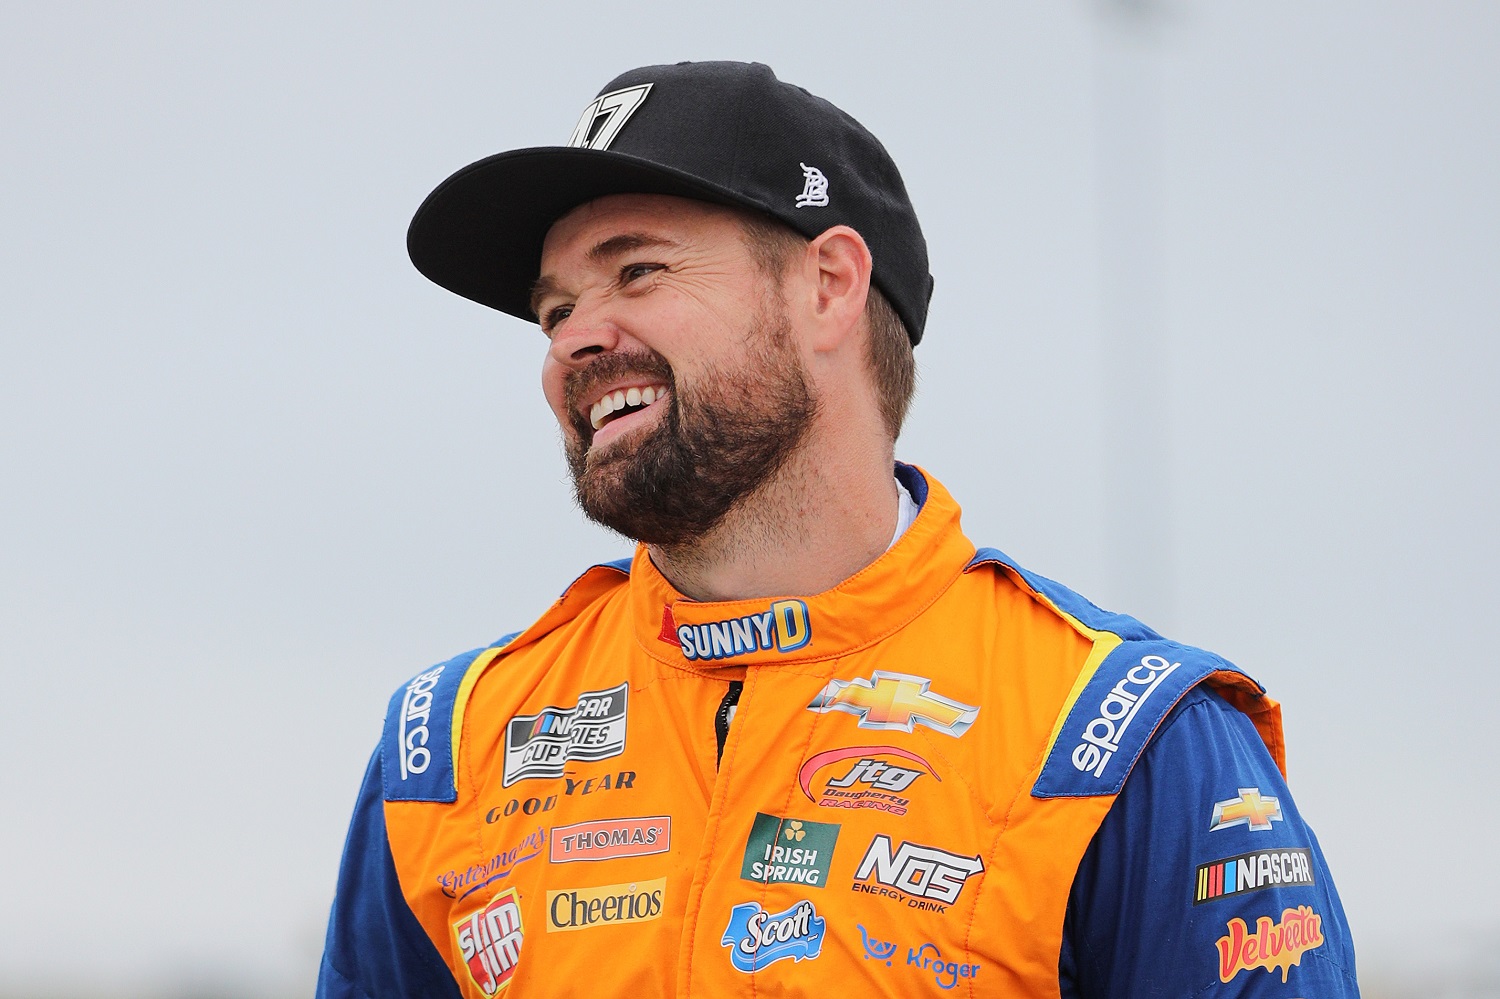 Ricky Stenhouse Jr. waits on the grid during practice for the NASCAR Cup Series Hollywood Casino 400 at Kansas Speedway on Sept. 10, 2022. | Meg Oliphant/Getty Images